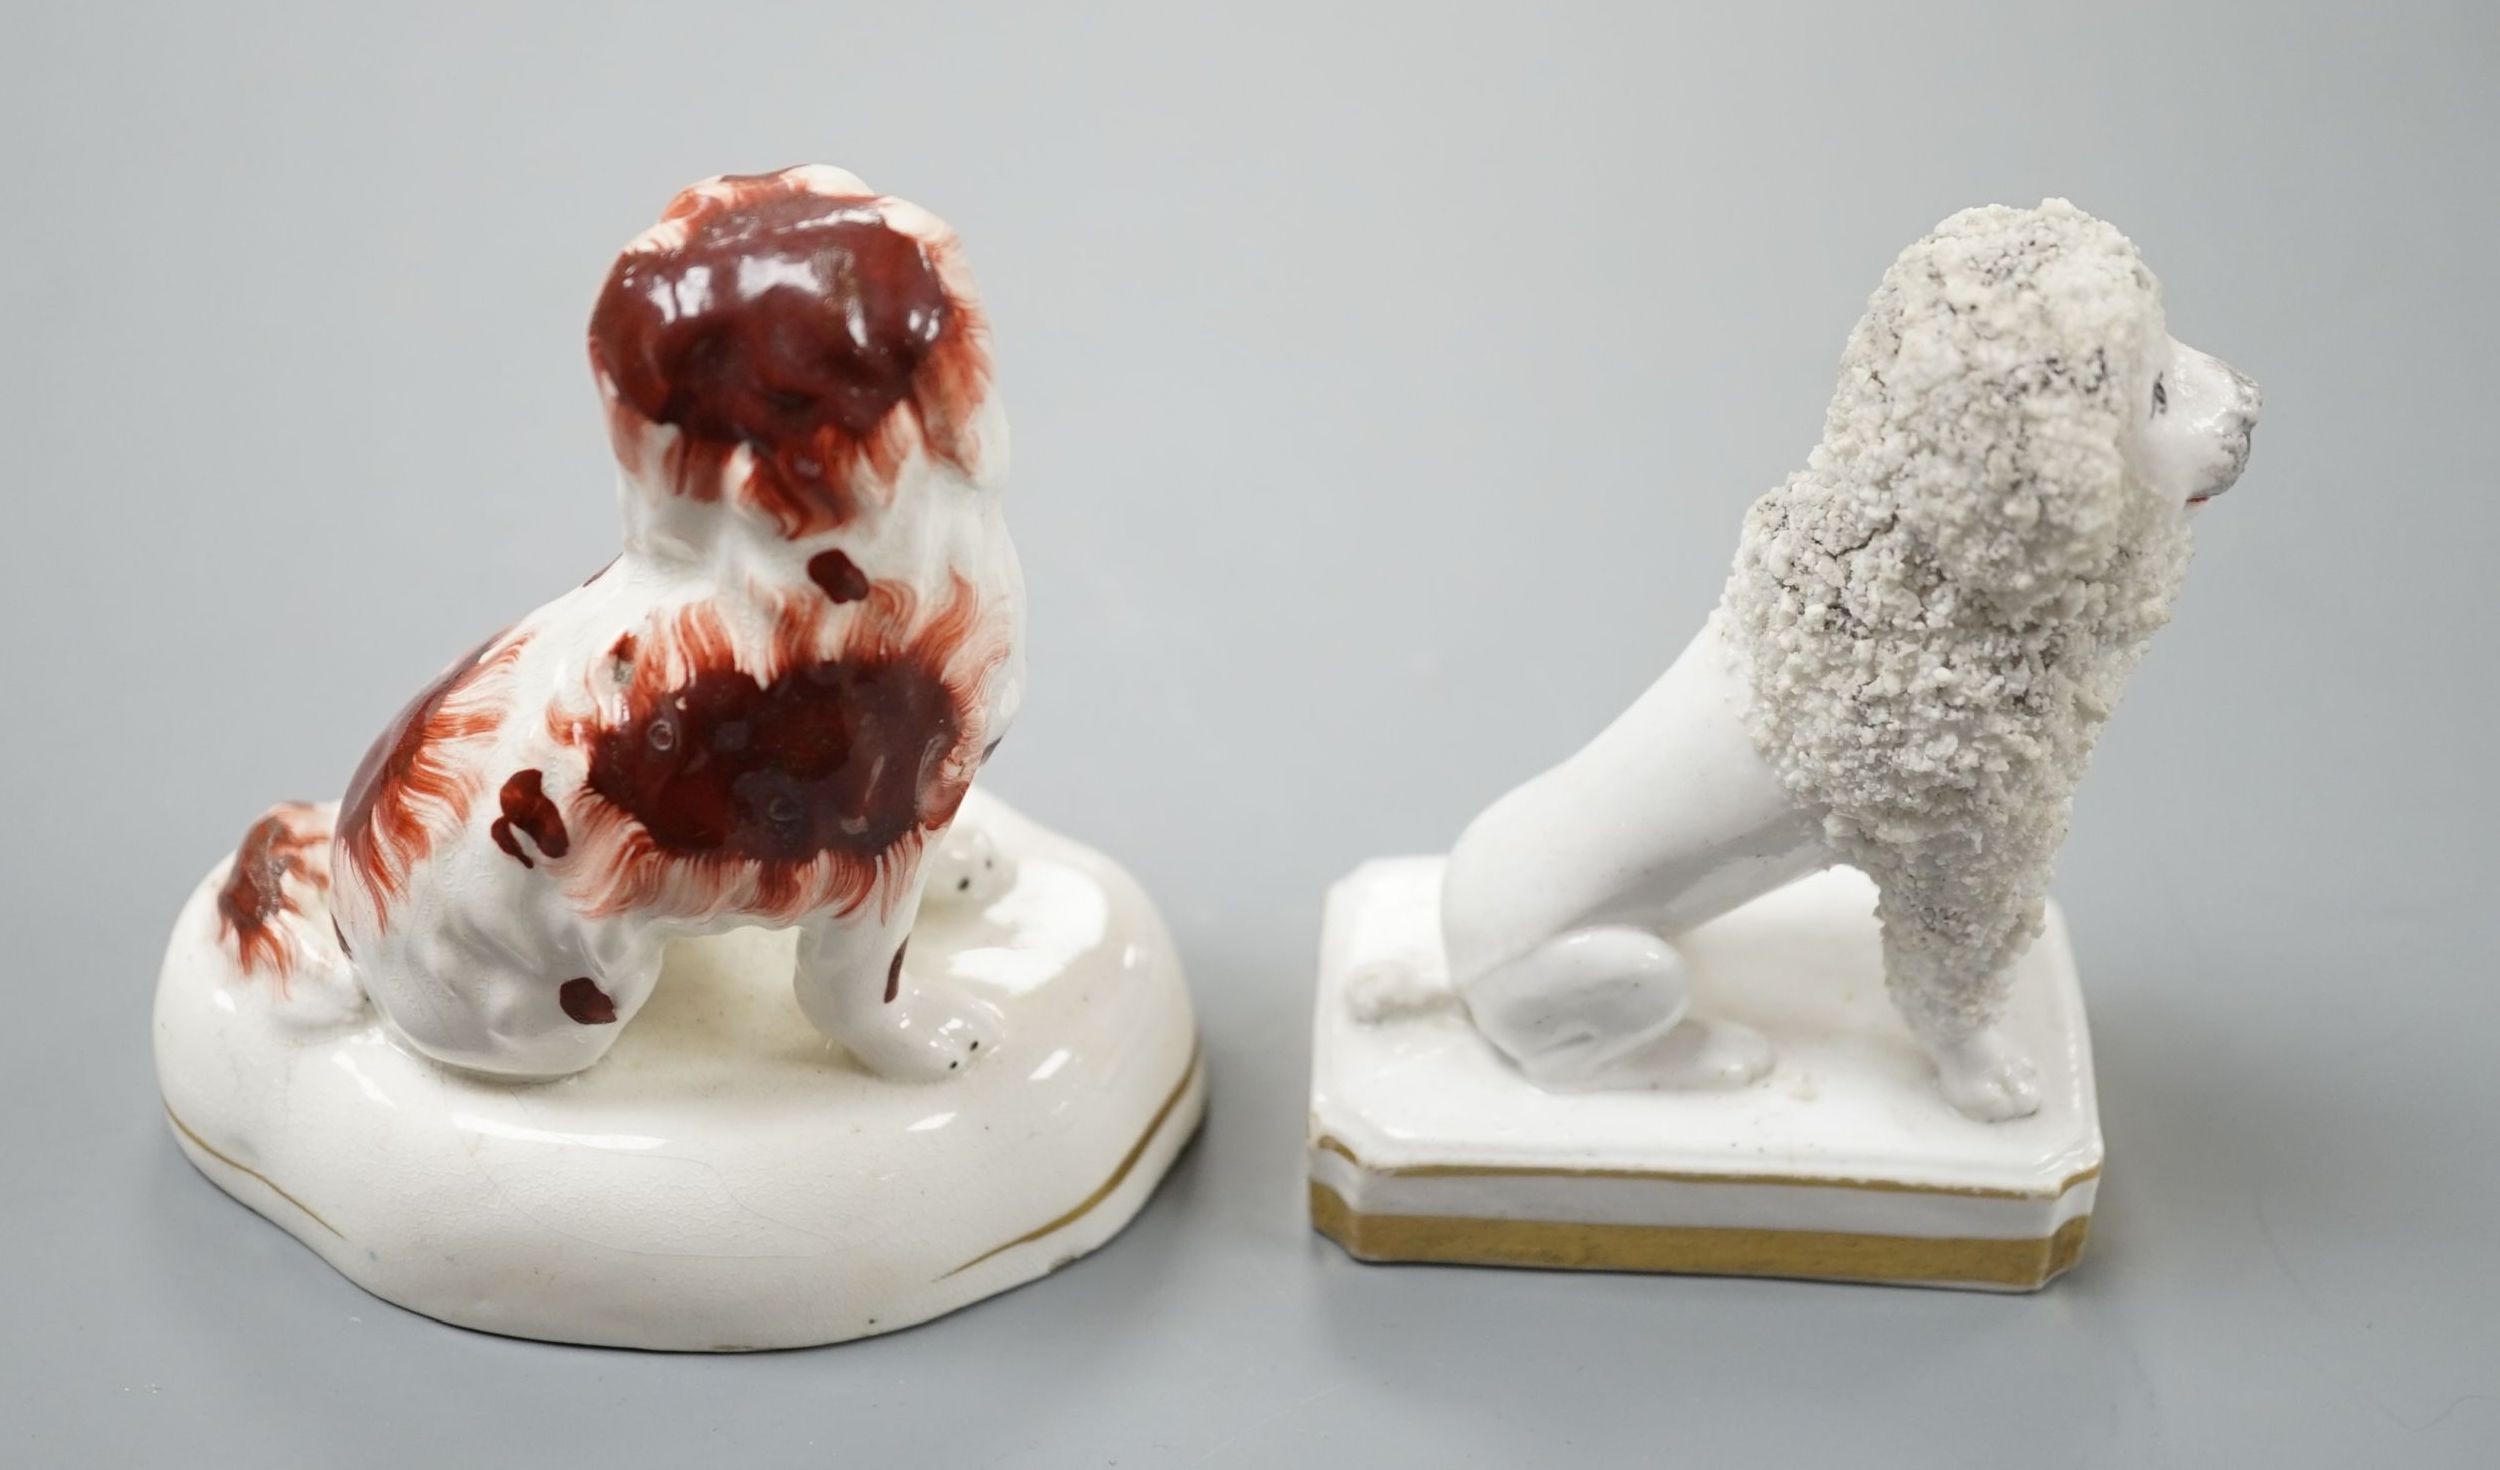 An unusual Staffordshire porcelain model of a seated poodle, 8.8cm high and a similar porcelain model of a seated King Charles Spaniel, c.1835-50, impressed mark ‘H’, Cf. Dennis G.Rice Dogs in English porcelain, colour p